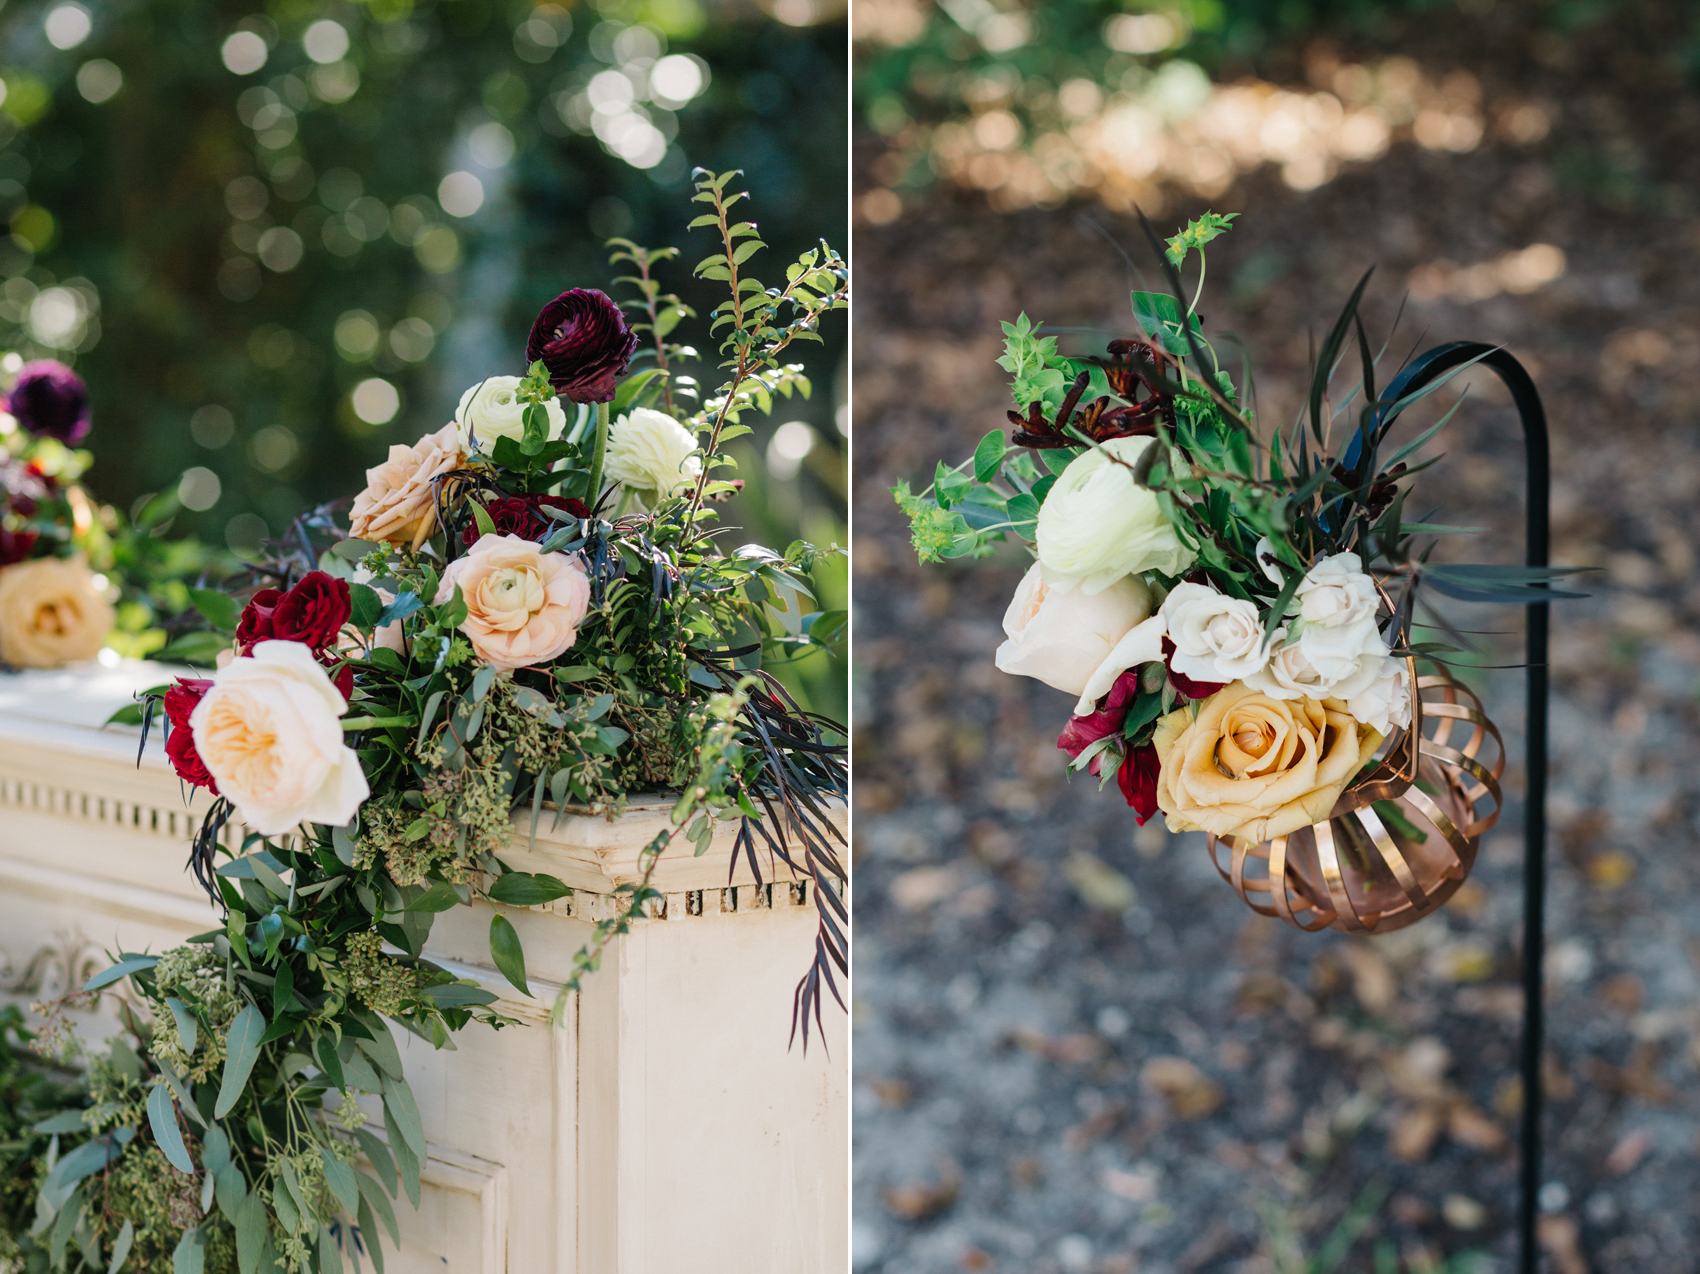 Floral details on the vintage mantle featuring lush peach and burgundy peonies and garden roses